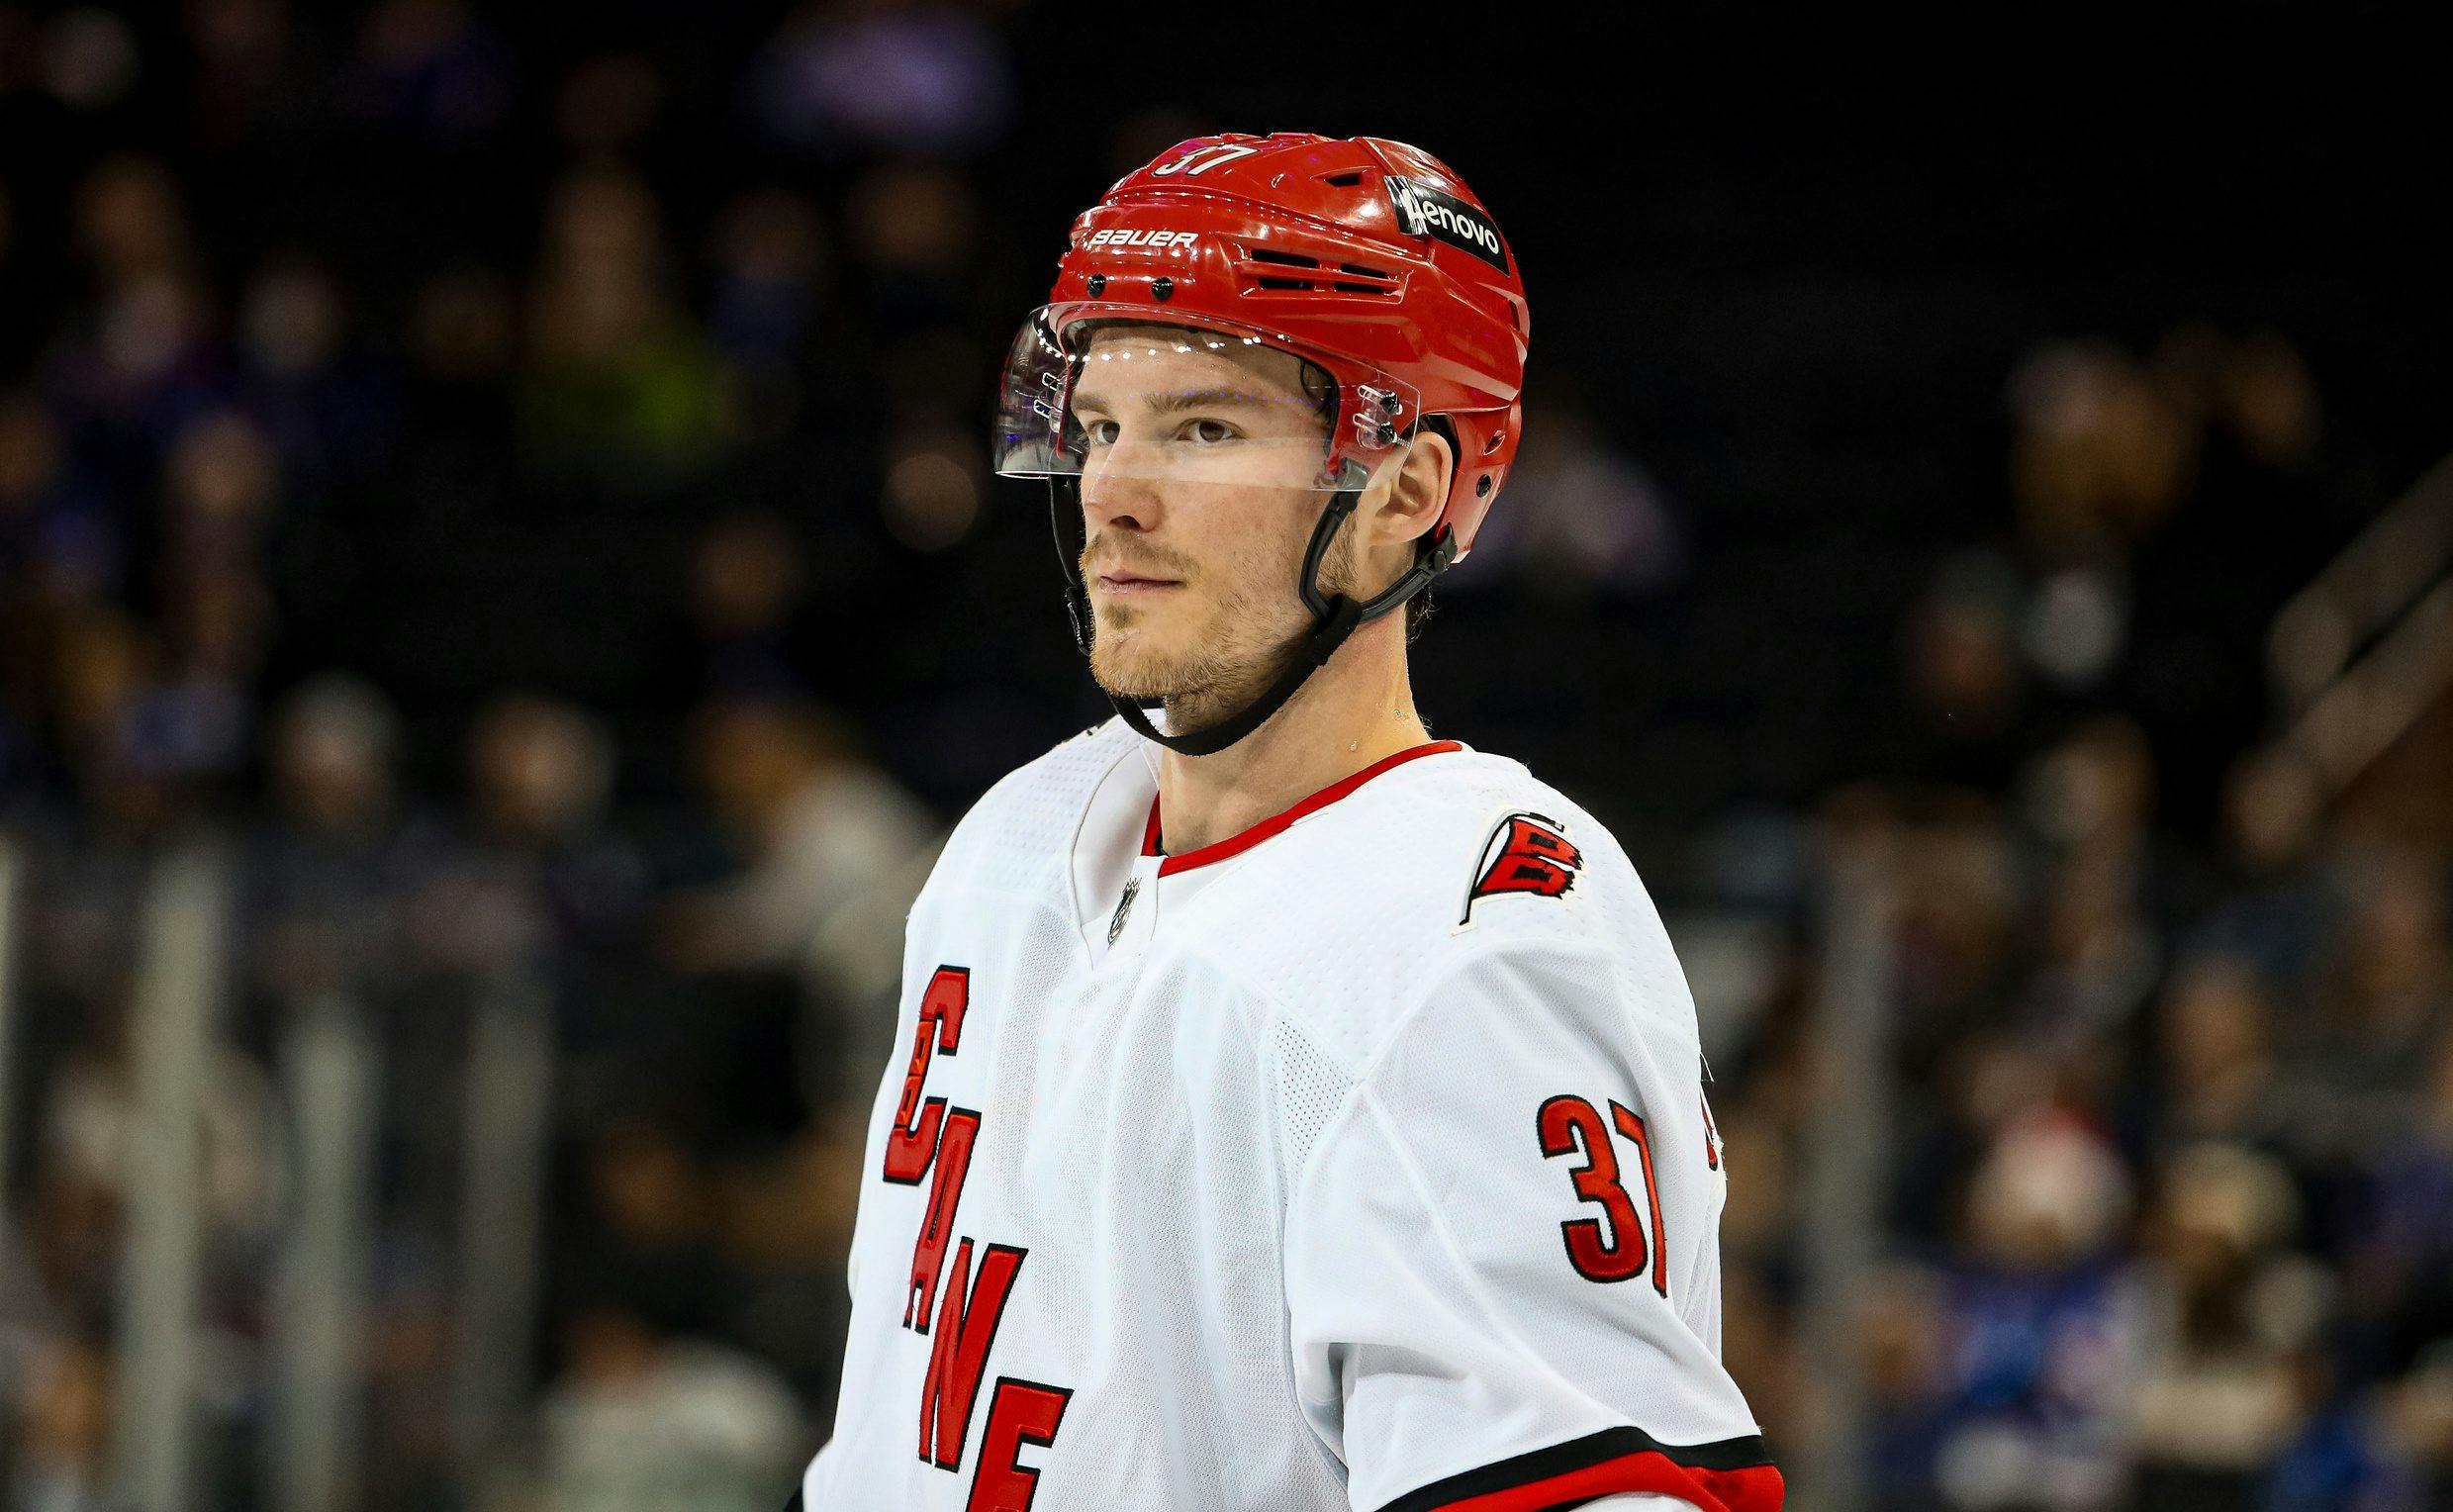 Hurricanes forward Andrei Svechnikov to miss Sunday’s game with upper-body injury